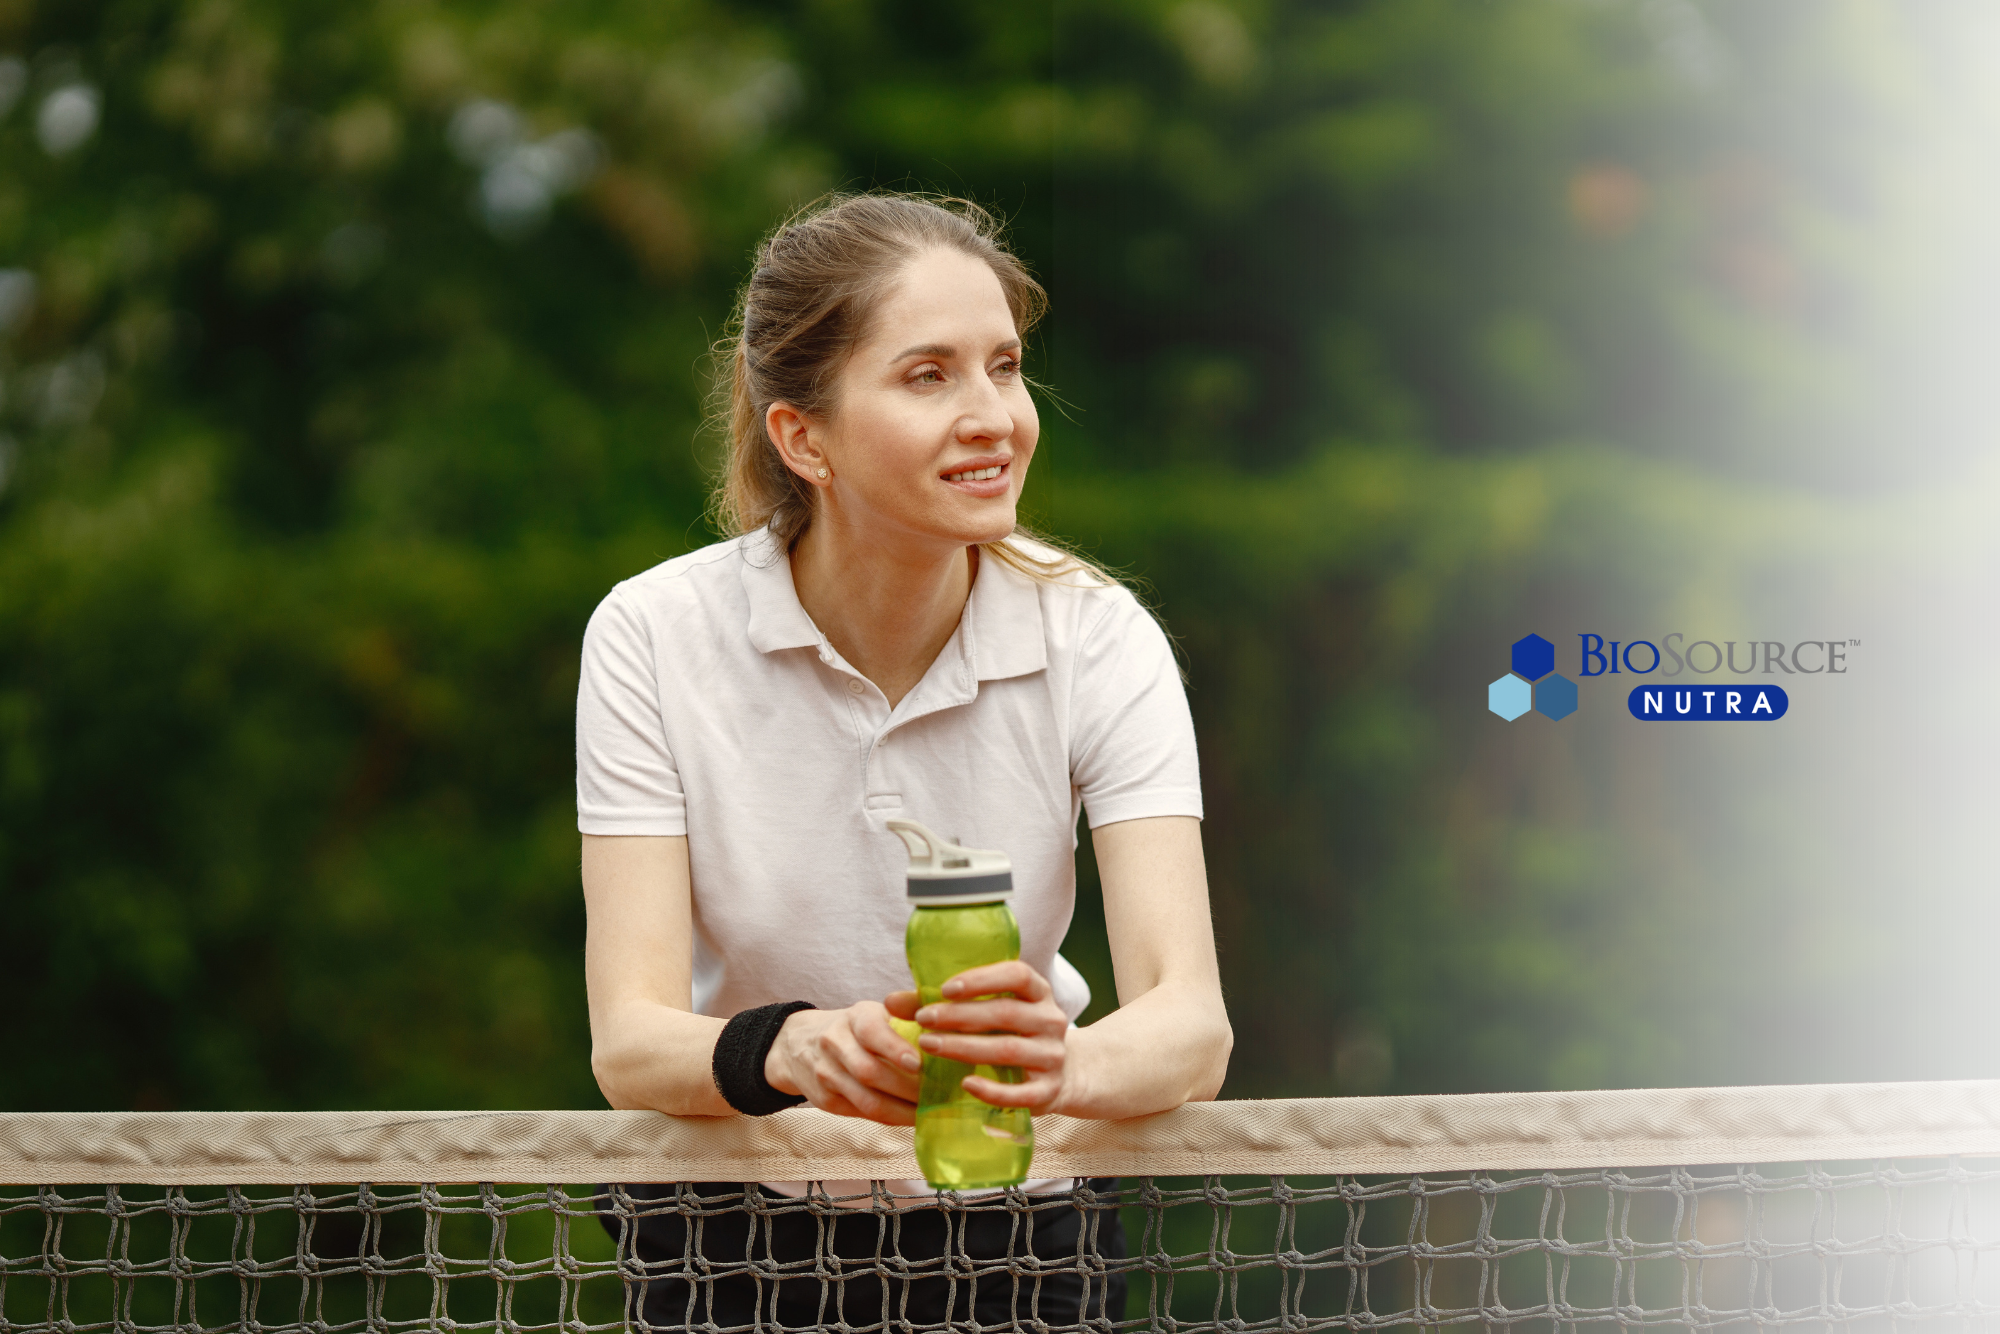 A young woman takes a break from playing tennis to hydrate